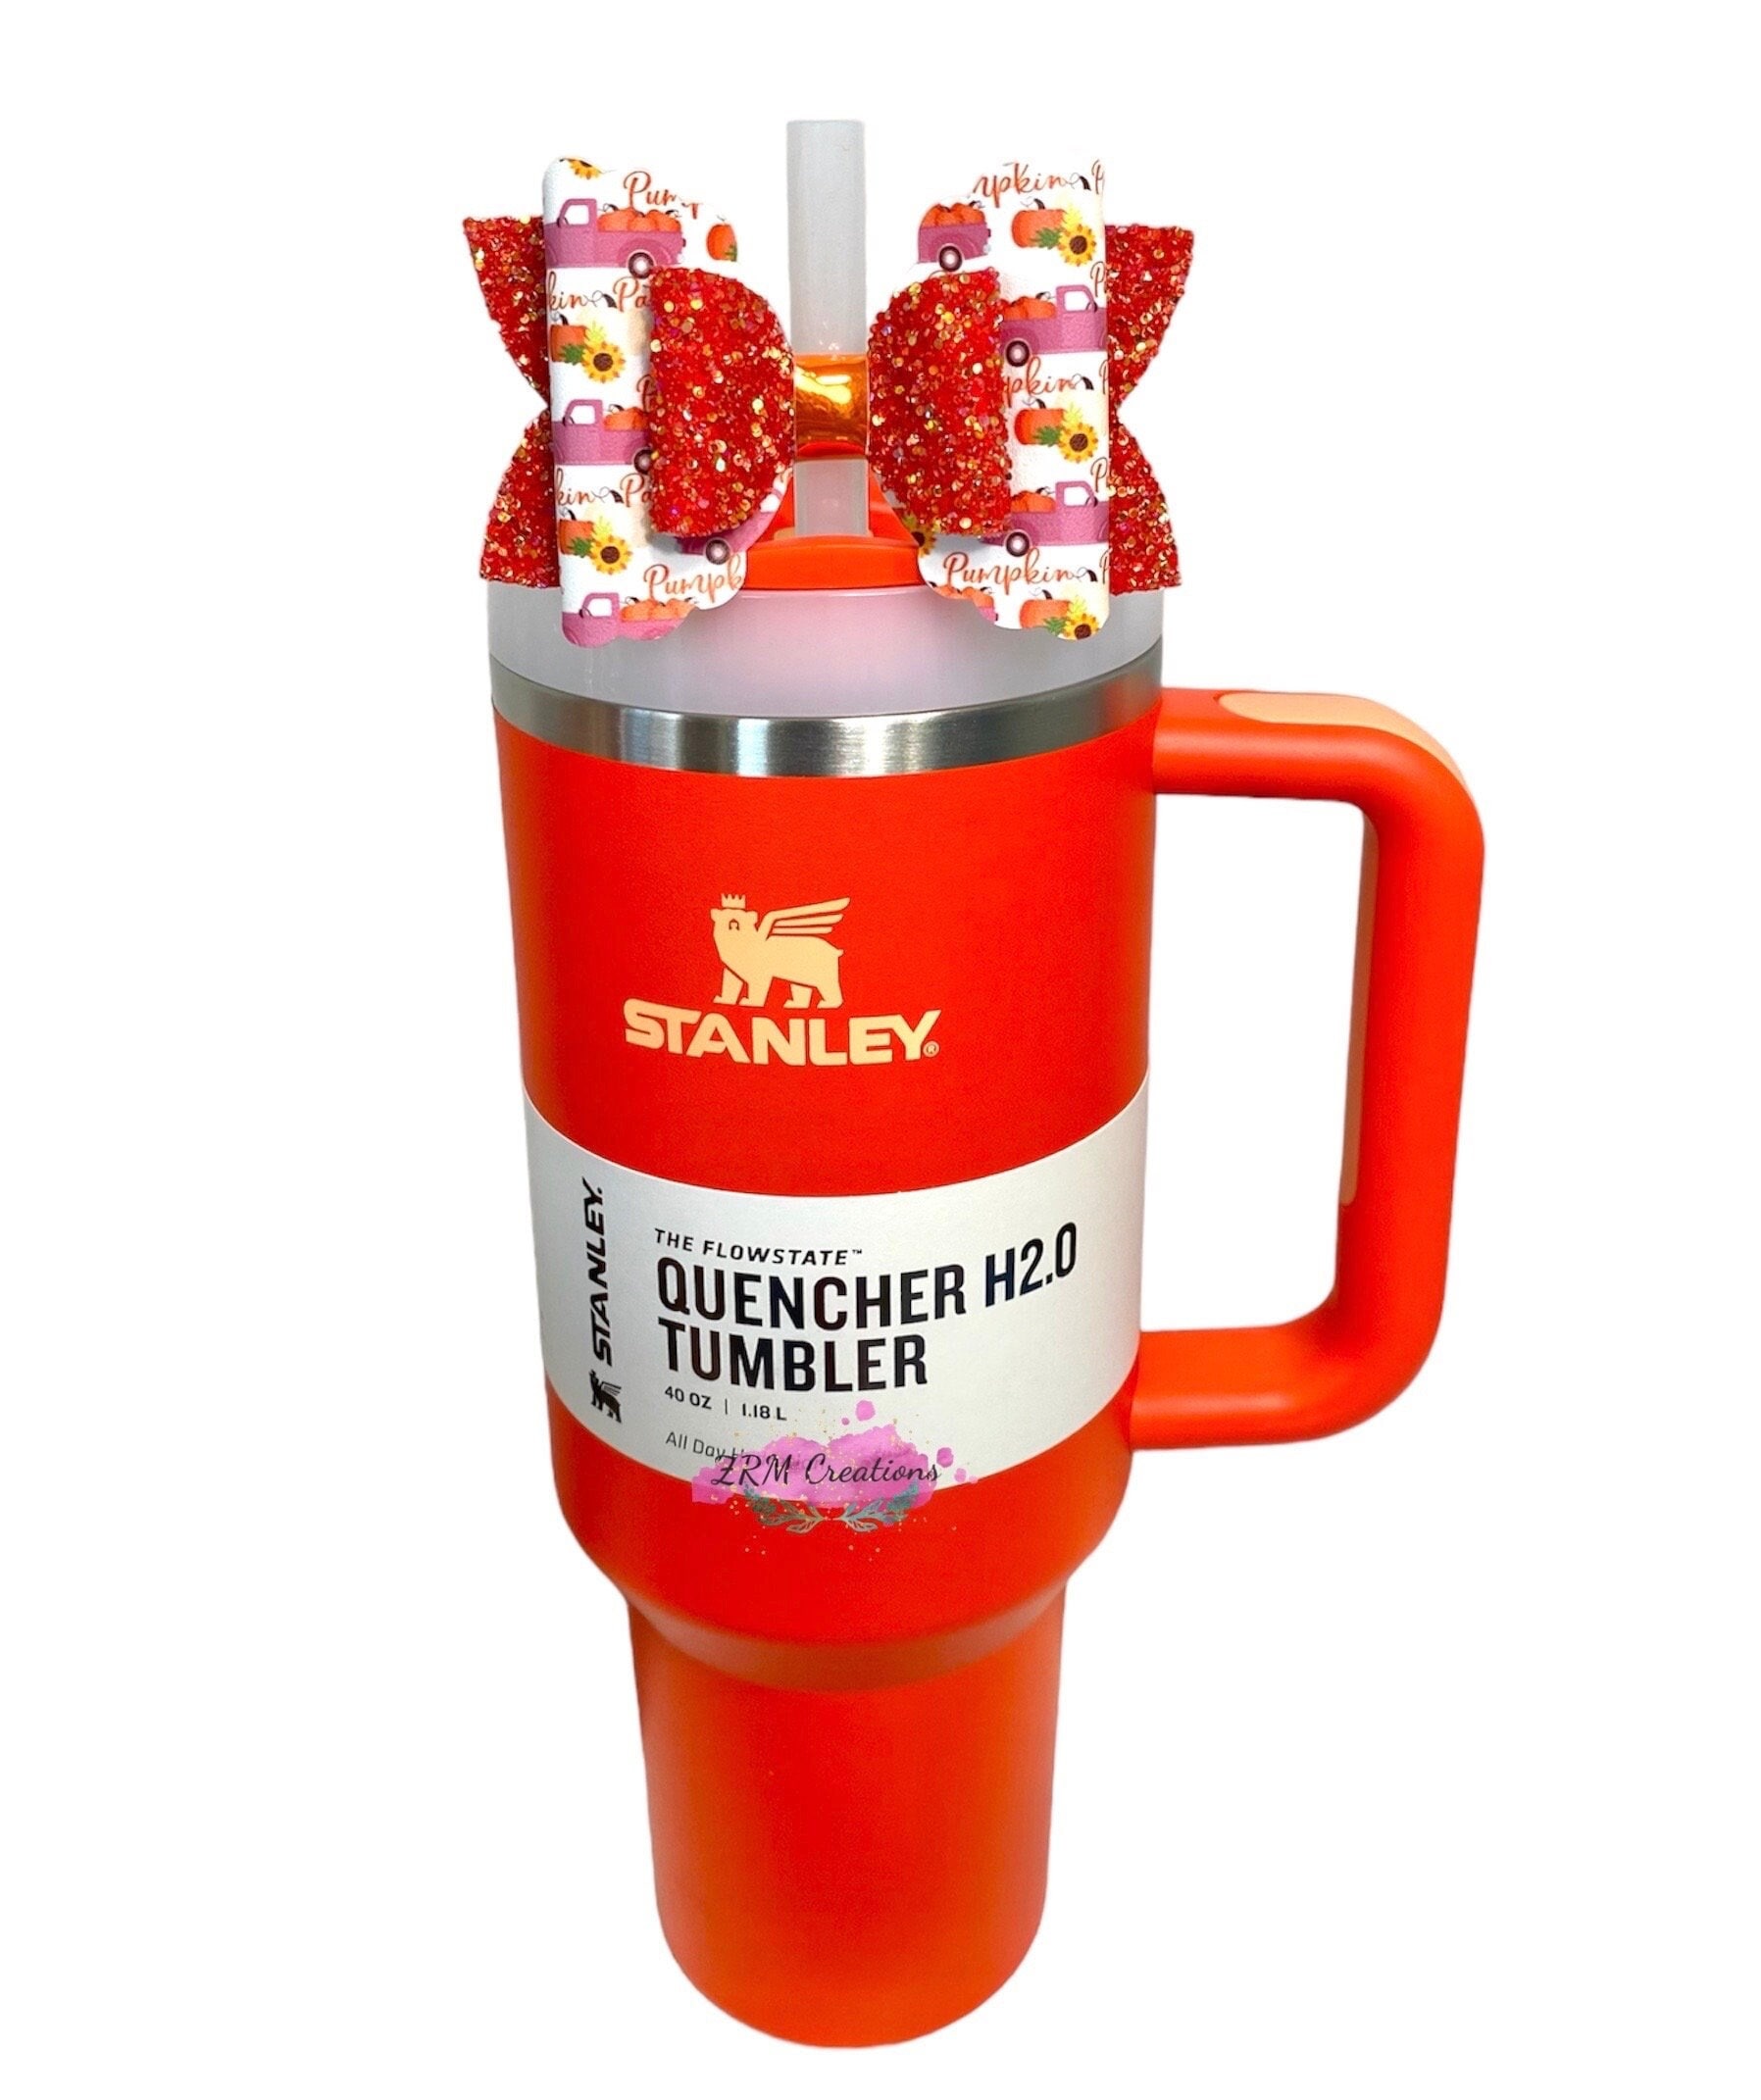 Cup Straw Cover Flower Straw Covers Topper For Stanley Cup - Temu